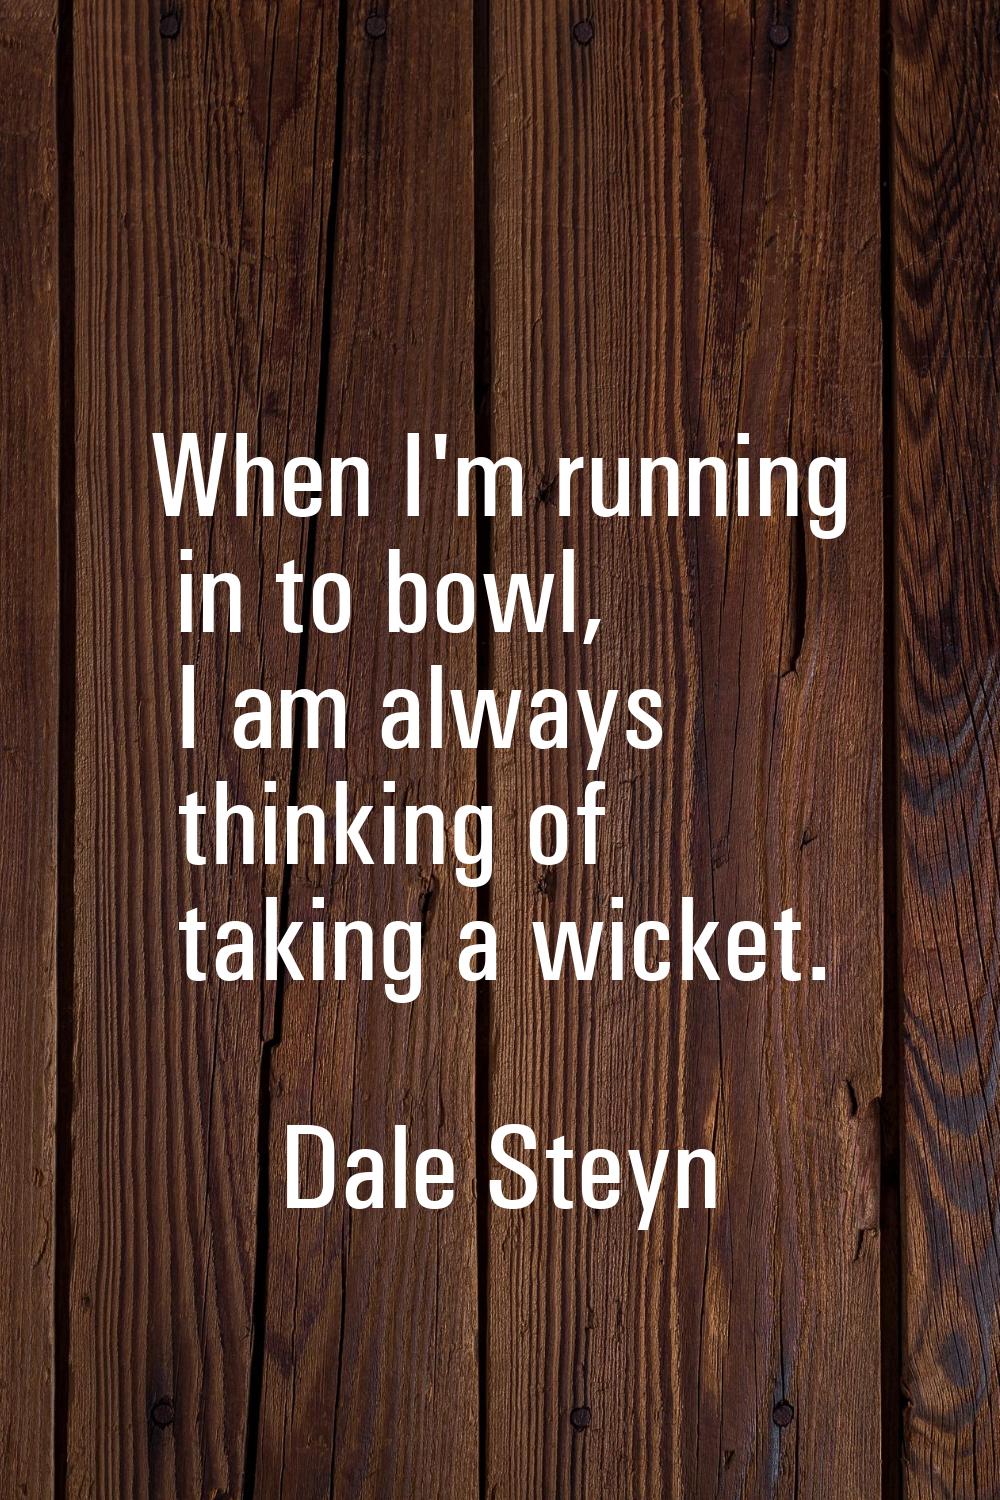 When I'm running in to bowl, I am always thinking of taking a wicket.